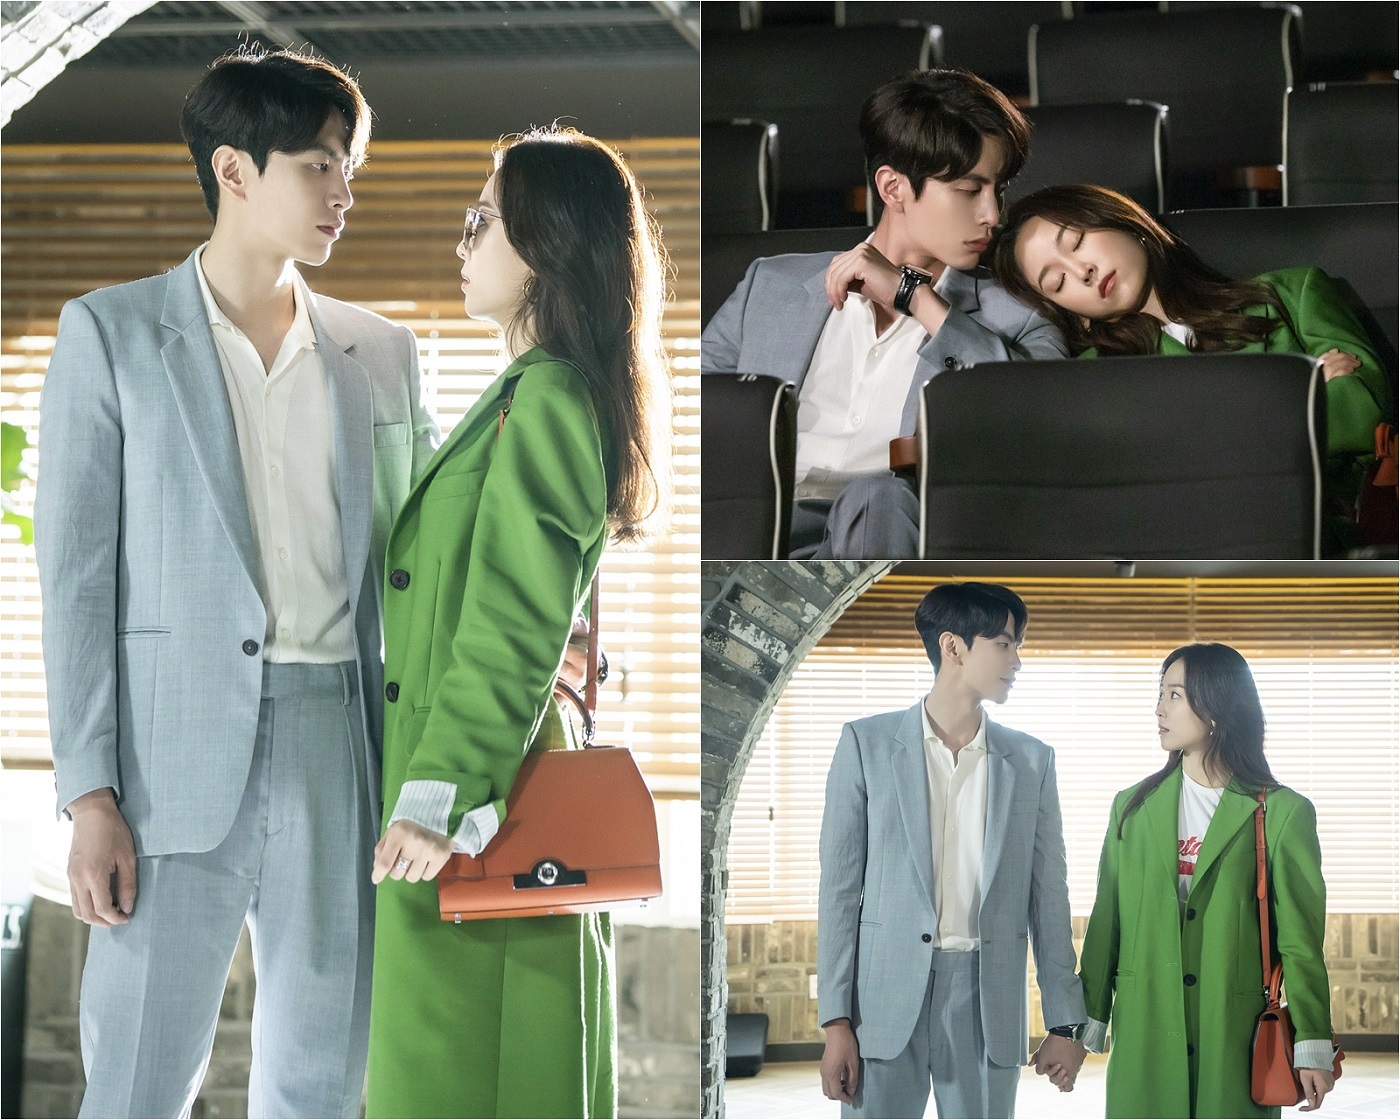 JTBCs monthly drama Beauty Inside (playplayed by Im Echo/directed by Song Hyun-wook) raises questions by revealing the romantic movie theater dating scene of Han World (Seo Hyun-jin Minute) and Seo Do-jae (Lee Min Ki Minute) on the 9th.World and Seo Do-jae, who became a thorough business relationship starting with their fateful first meeting, learned each others secrets that were inevitable in the last three broadcasts.The two men, who had weaknesses that could not be revealed anywhere, knew better than anyone else the anxiety and loneliness they had felt, but they spoke to each other.The opening ceremony was held with Seo Do-jae bringing in the ball while maintaining tight tension without any backing down.Suddenly, the main guest who changed clothes came to Seo Do-jae and asked for a greeting, and World helped him in crisis.Seo Do-jae, who had been afraid that his flaws would be revealed, visited World and offered end-ending with a special straight line.With Seo Do-jaes surprise co-operation (?) proposal, curiosity amplified by the uncanny romance between one World and Seo Do-jae, the scene of the worlds sweet movie theater date was revealed.In the empty movie theater, the romantic minute crisis with the two, a world that is sleeping on the shoulder of Seo Do-jae catches the eye.Seo Do-jaes eyes, which cannot keep an eye on Han World, raise questions about their relationship changes, and two people who have been caught up in a scandal and are not able to hide it.The figure of a world looking at him with a powerful Seo Do-jae and surprised eyes wrapped around the waist of a world causes excitement.In the 4th broadcast on the 9th, one World and Seo Do-jae, who are holding each others weaknesses and secrets, are one step closer and feel emotional change.The two people who are involved in a thorough business relationship are expected to enter into a thrilling mode by developing their understanding of each other.The anti-war Minute crisis, which has become more thrilled and more exciting on the strange tension, is expected to be a magical romance between World and Seo Do-jae.Beauty Inside production team said, World and Seo Do-jae, who have their own loneliness and pain that no one knows, will become a little more honest with each other and start a full-scale relationship change. The emotions of the two people, which are delicate and detailed, will give empathy and excitement at the same time.